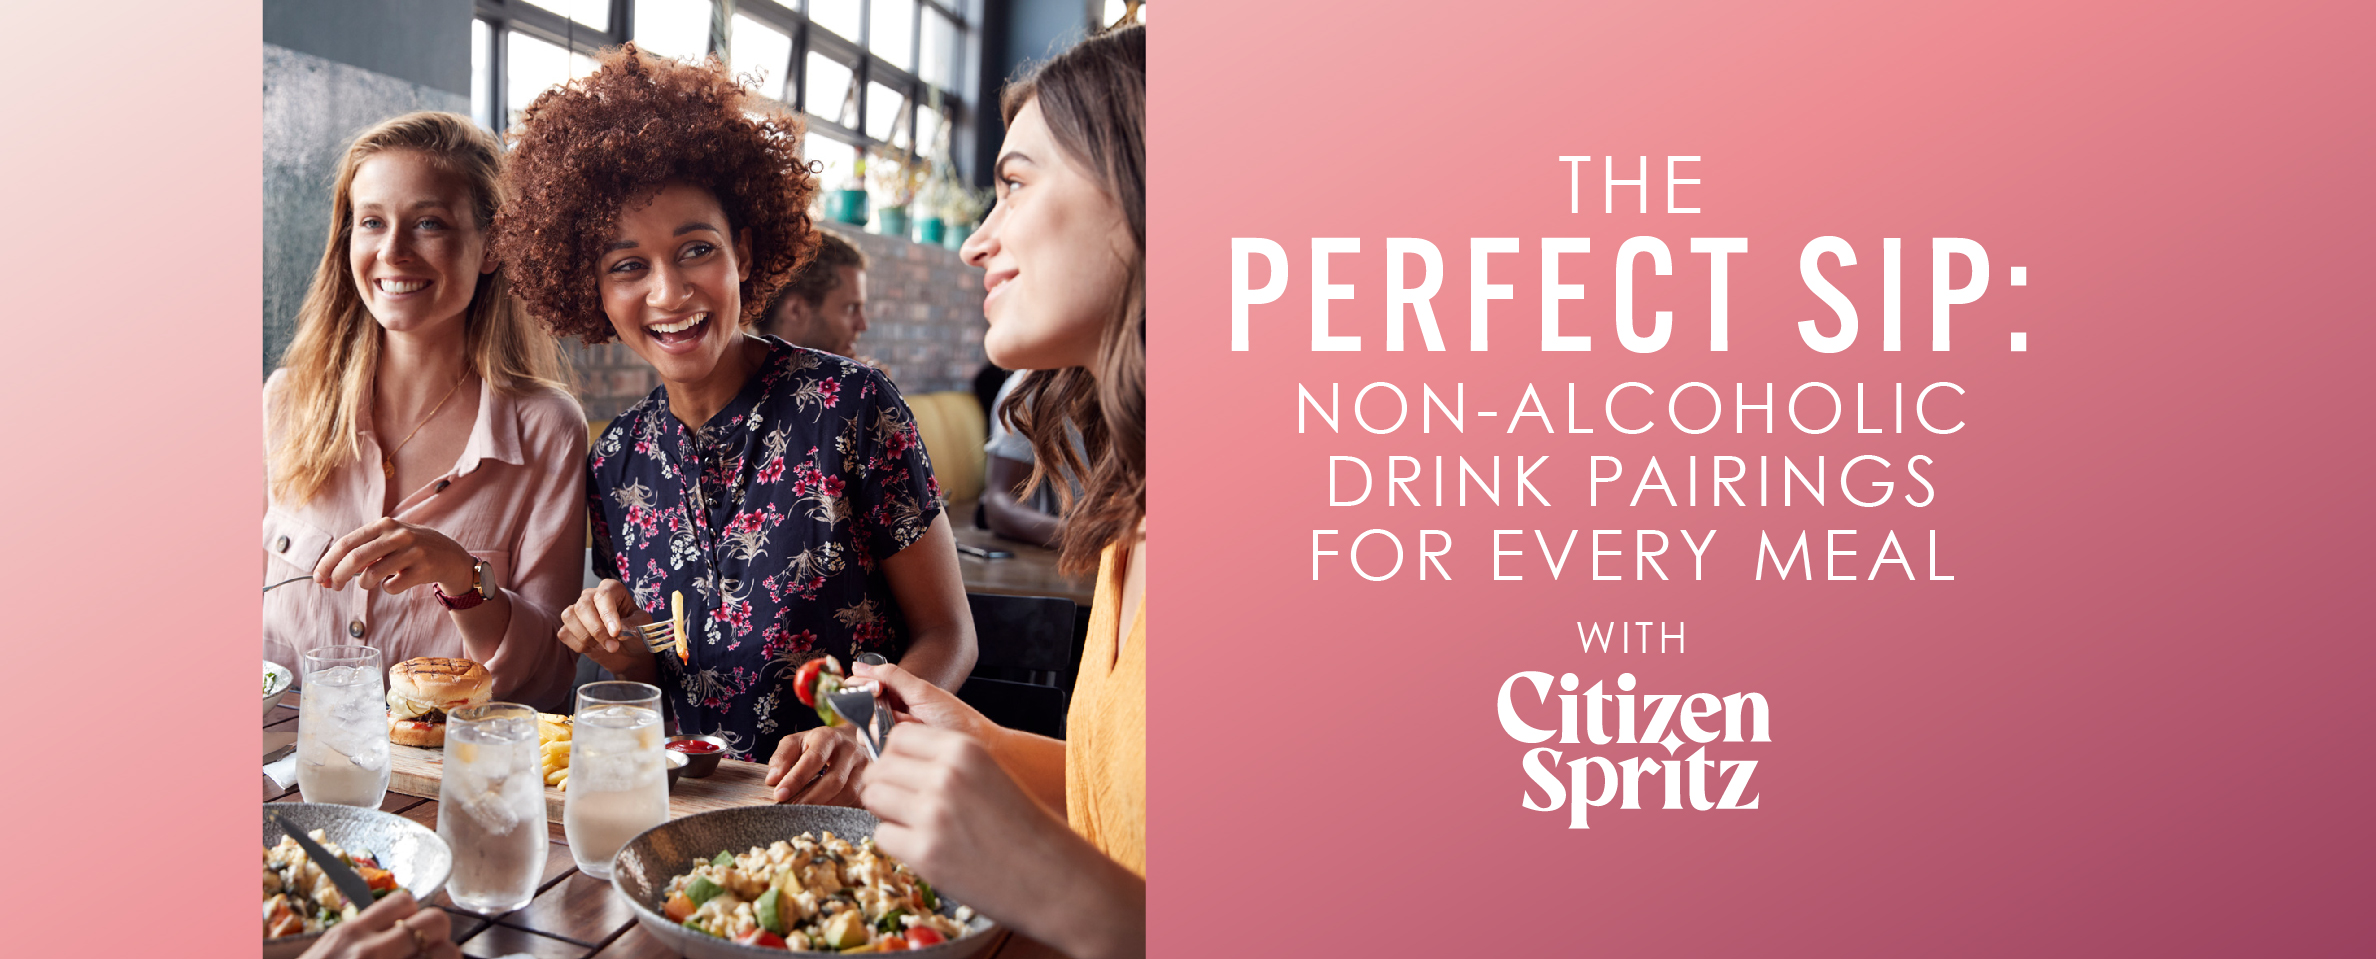 The Perfect Sip: Citizen Spritz Non-Alcoholic Drink Pairings for Every Meal